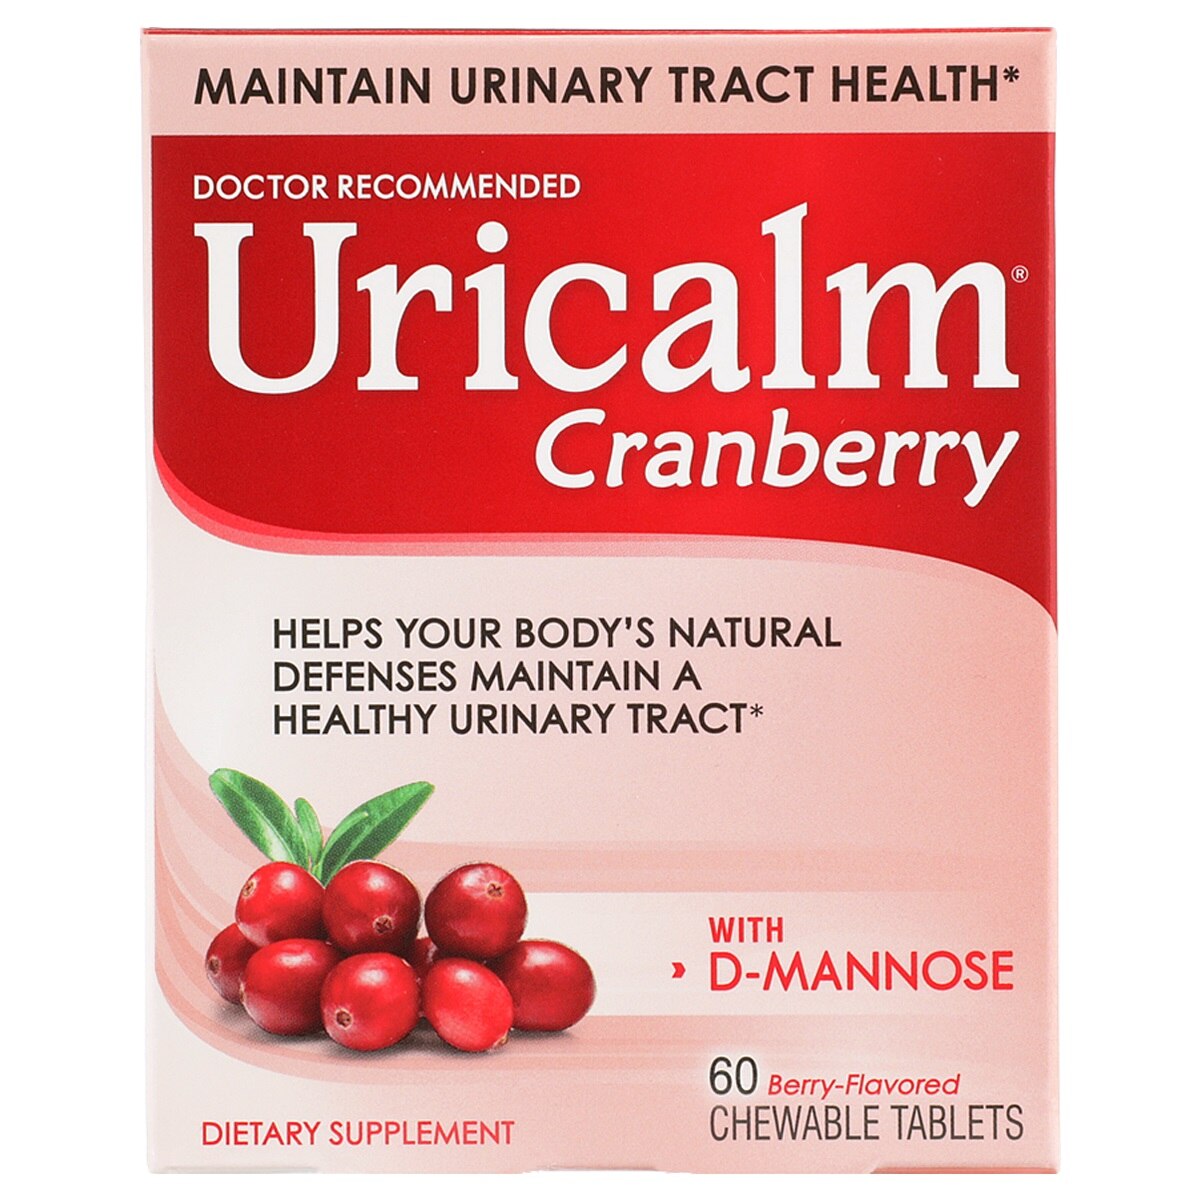 Uricalm Cranberry Daily Dietary Supplement Chewable Tablets, 60 CT